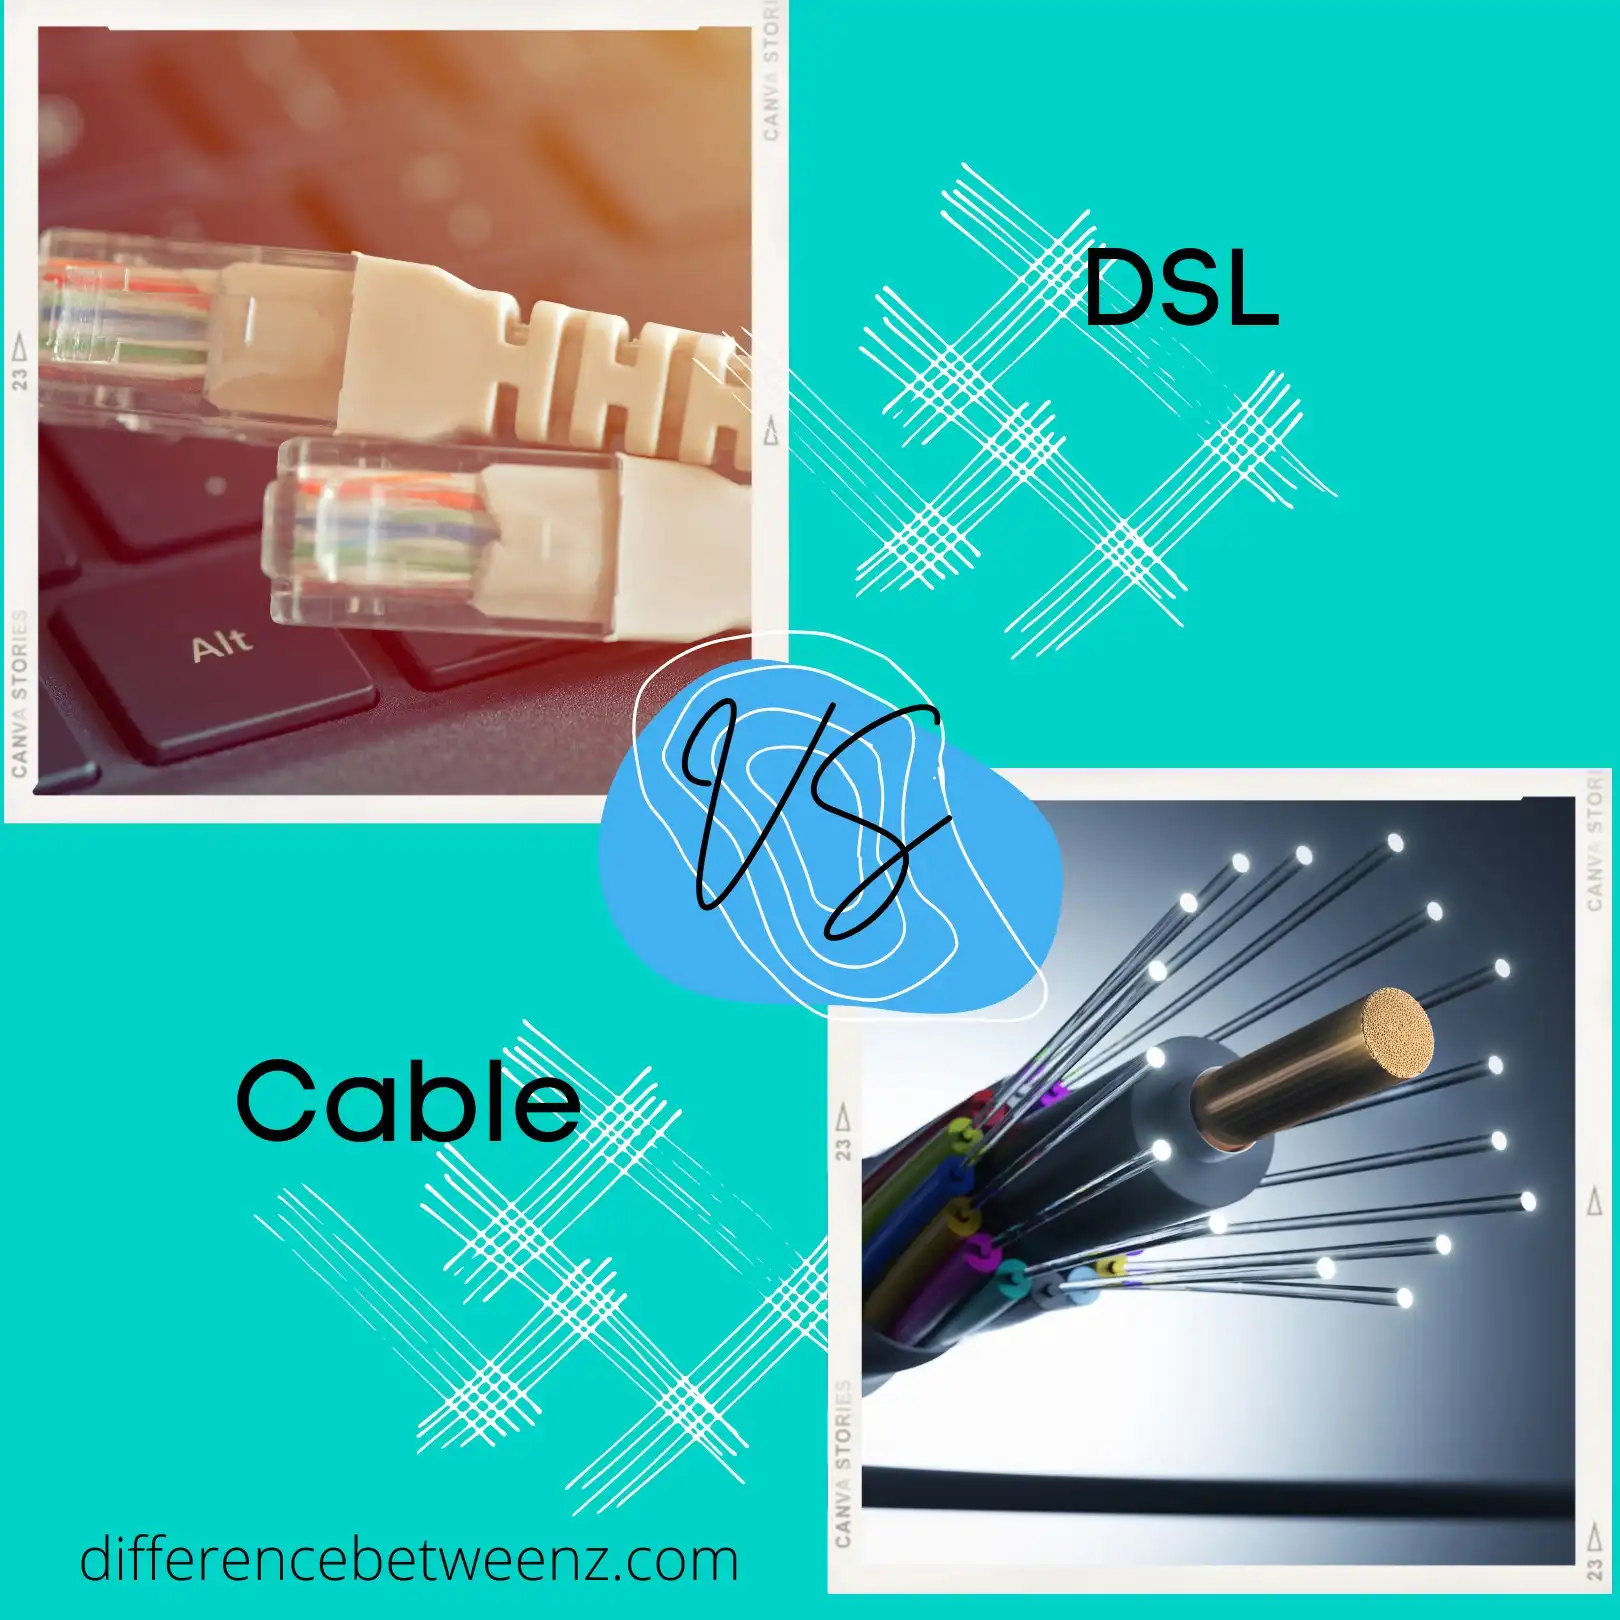 Difference between DSL and Cable